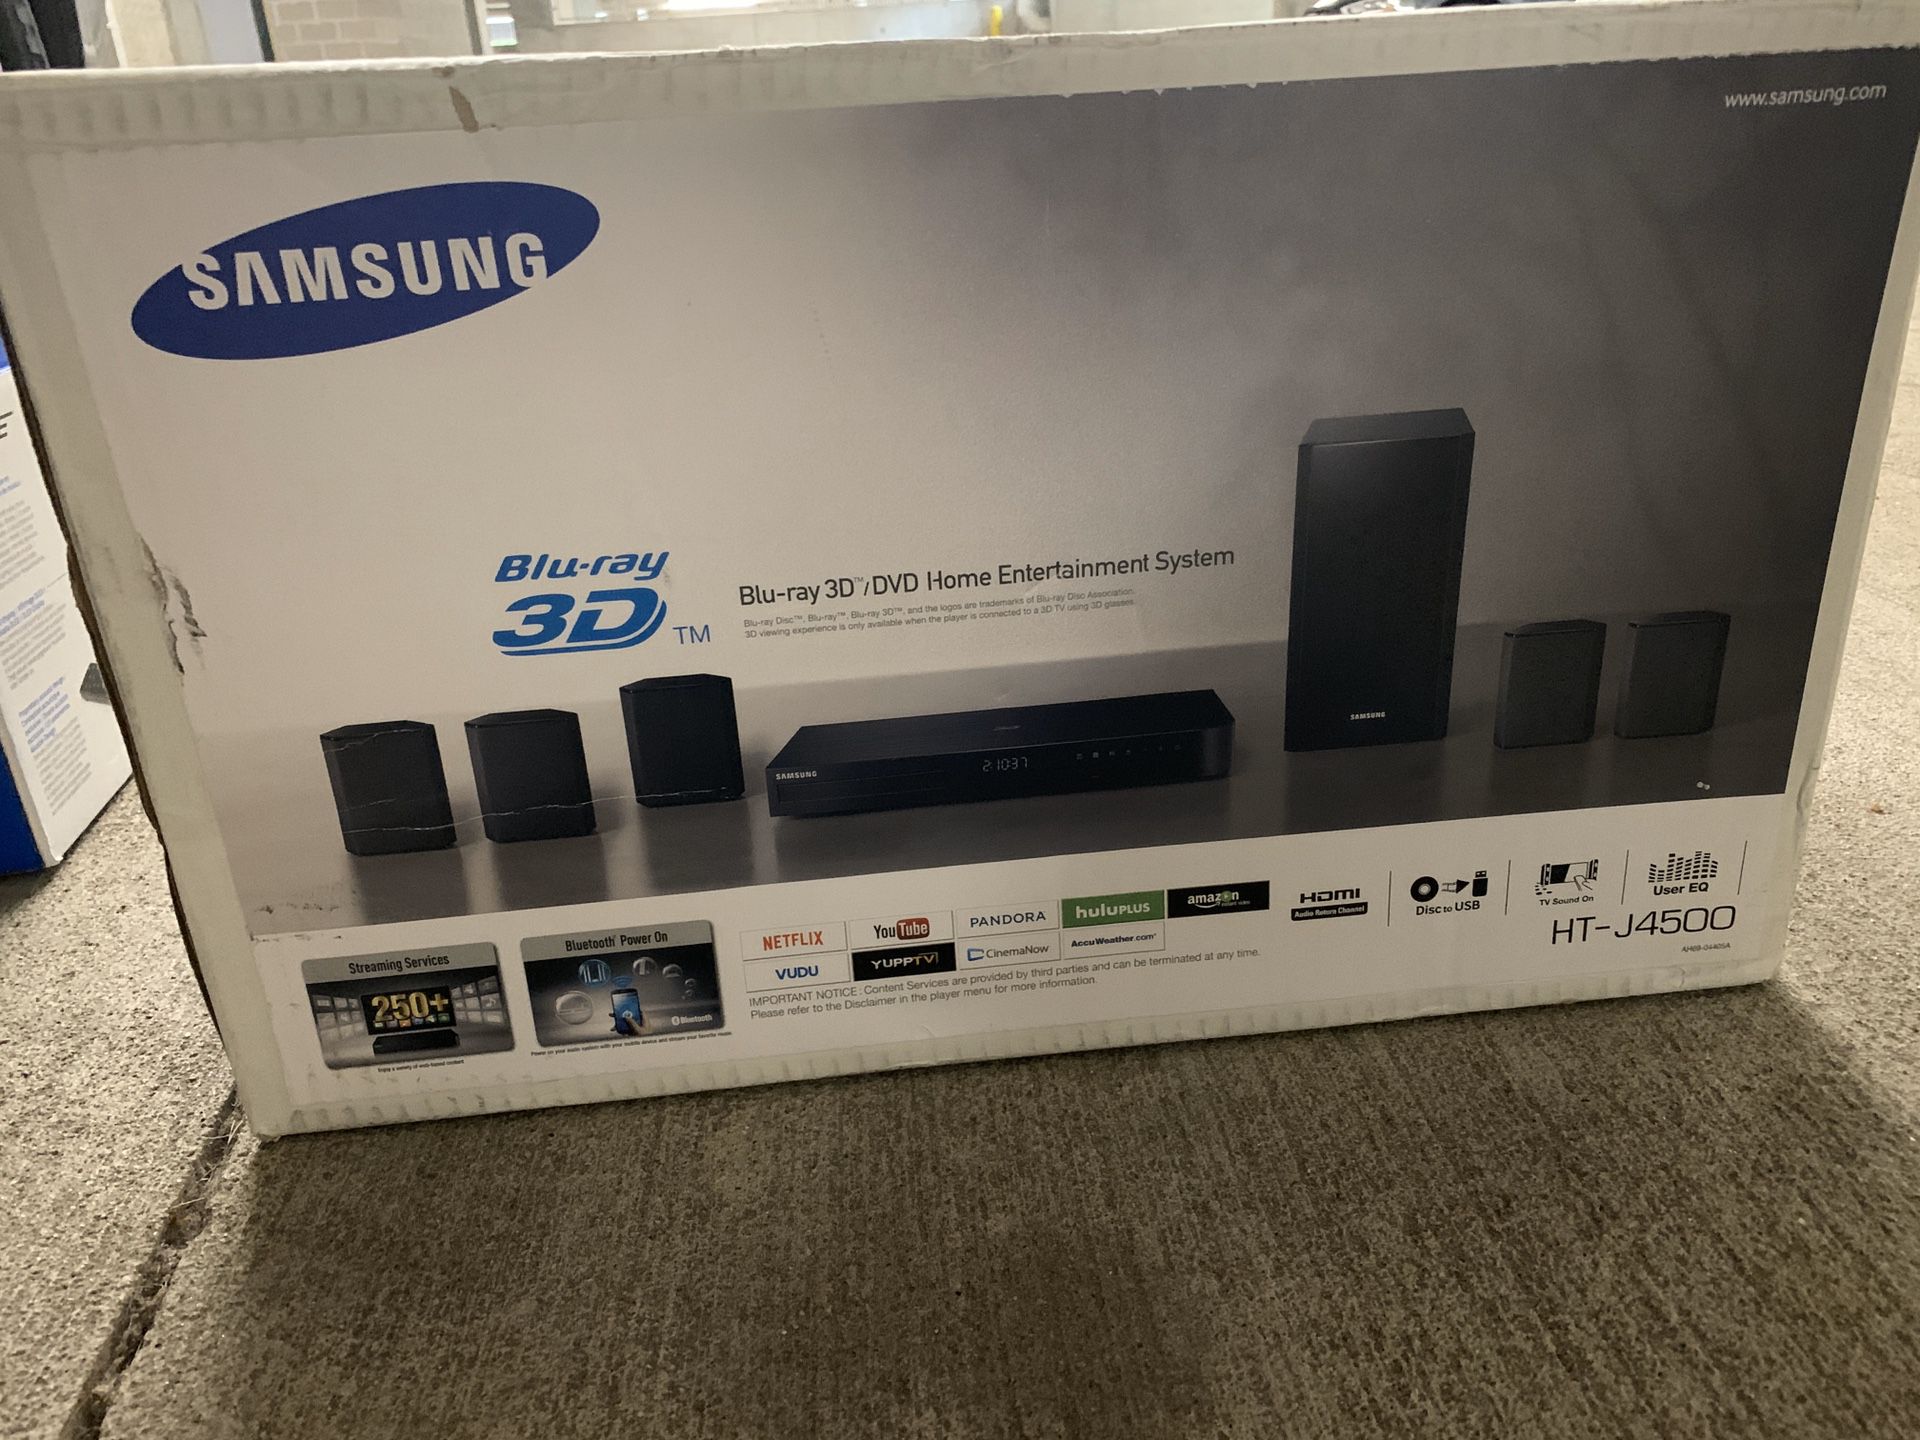 Samsung home theater and blue ray 3D